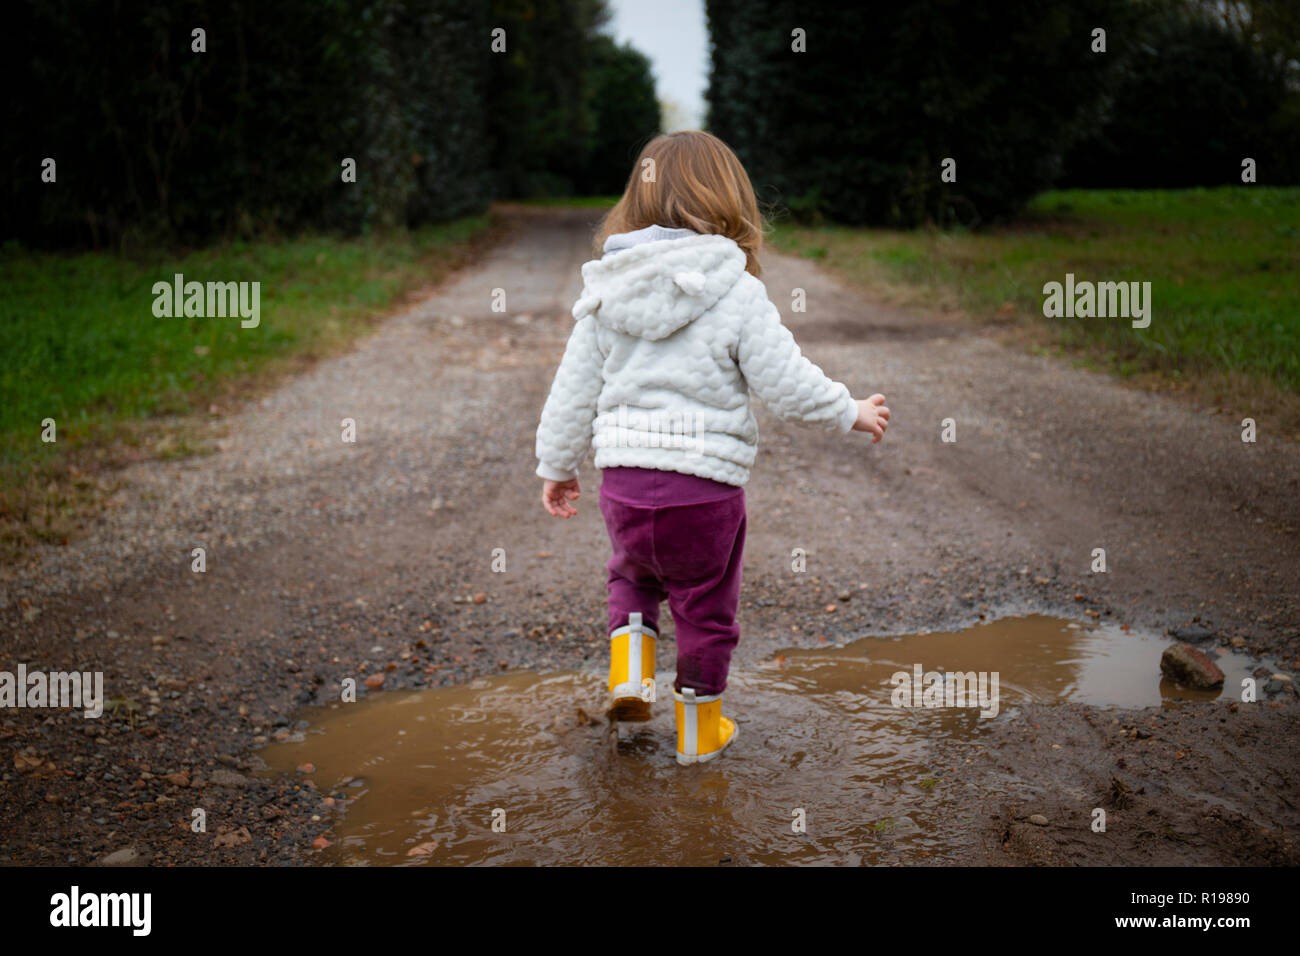 Toddler girl, back view, splashing in puddles in muddy country road with with yellow rain boots. Subject in the center. Stock Photo